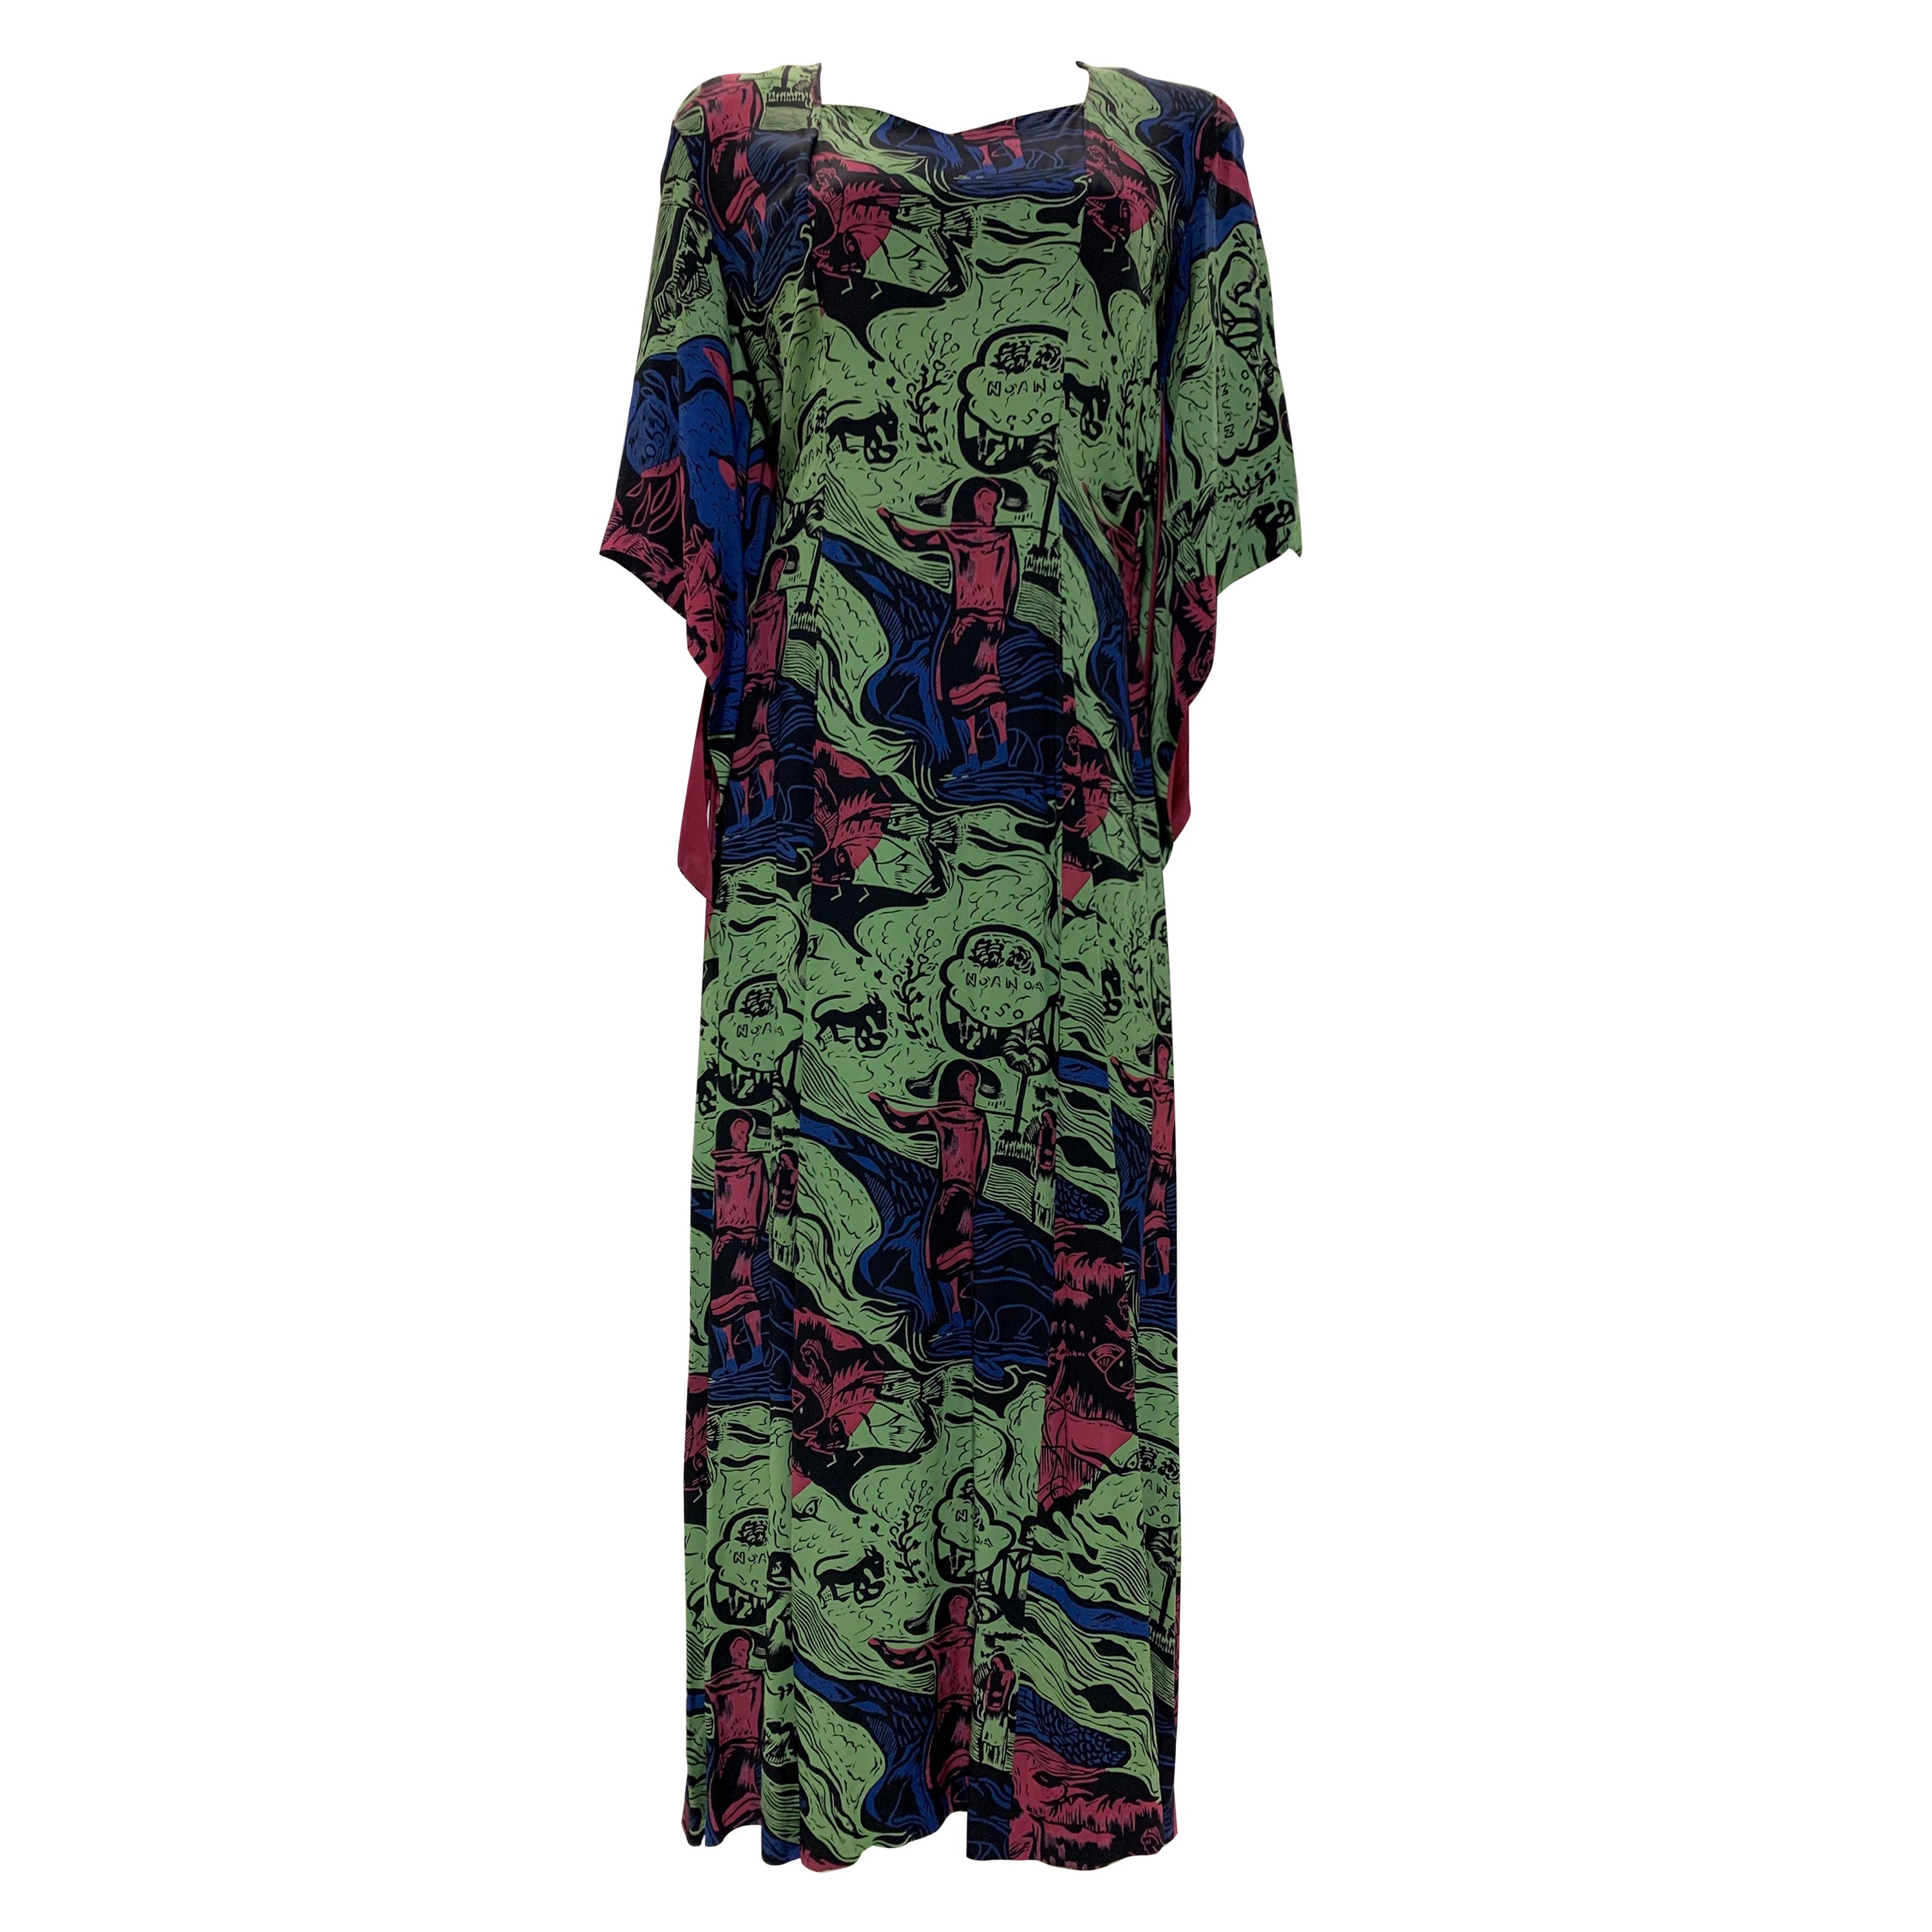 1940s Kamehameha Graphic Figural Print Rayon Dress in Polynesian Style